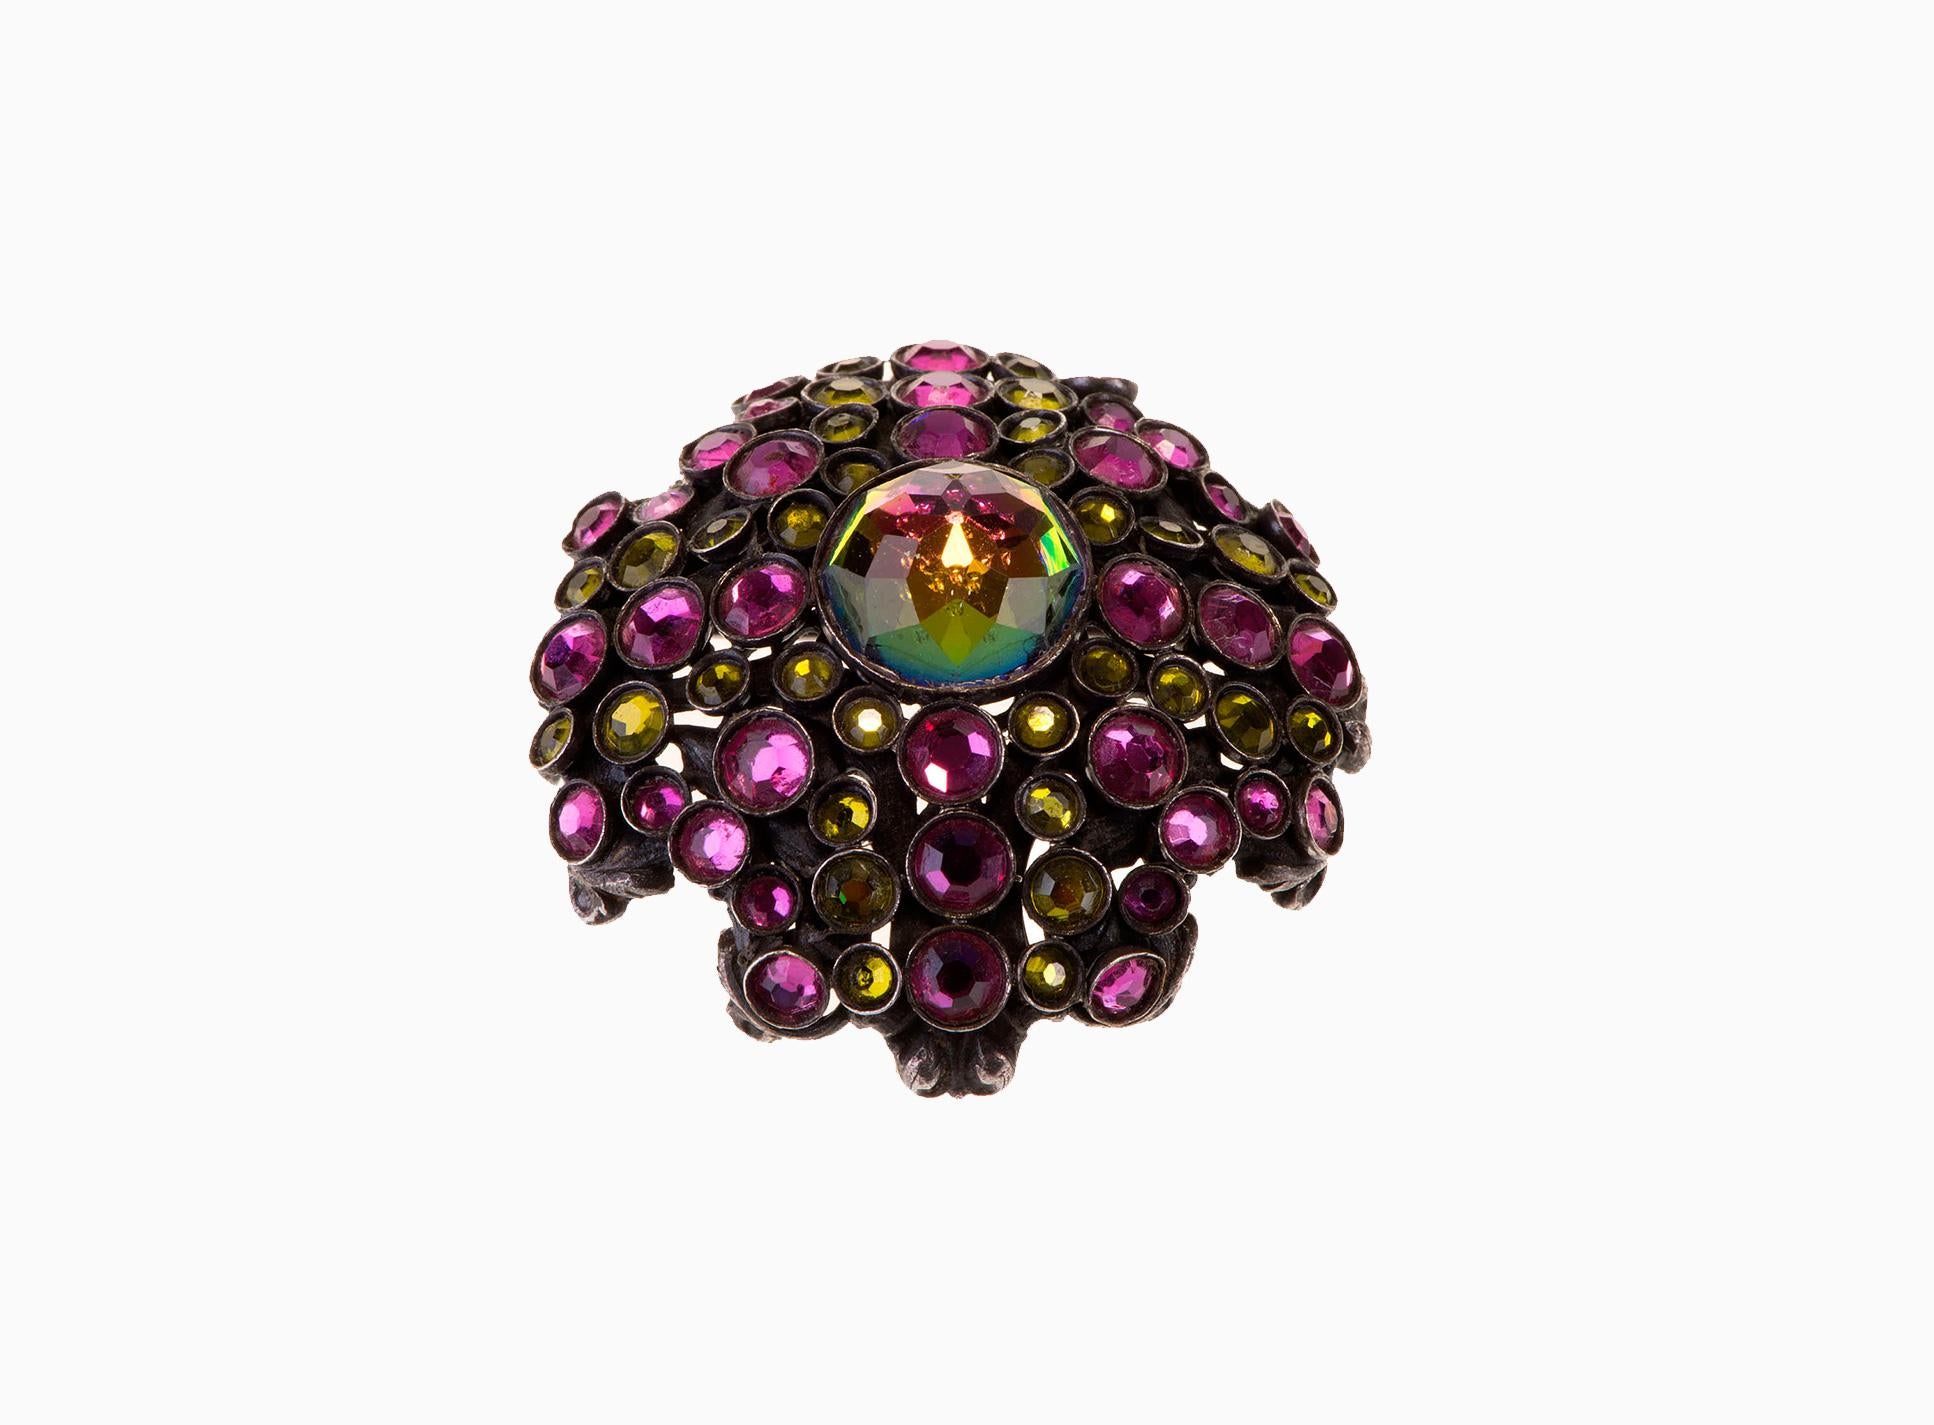 An absolutely stunning vintage jewel by Henry Bogoff, made in circa 1950. Henry Bogoff started his very successful business in Chicago, in 1940 and became the leading supplier of costume jewellery throughout the U.S.A. Eventually opening premises in